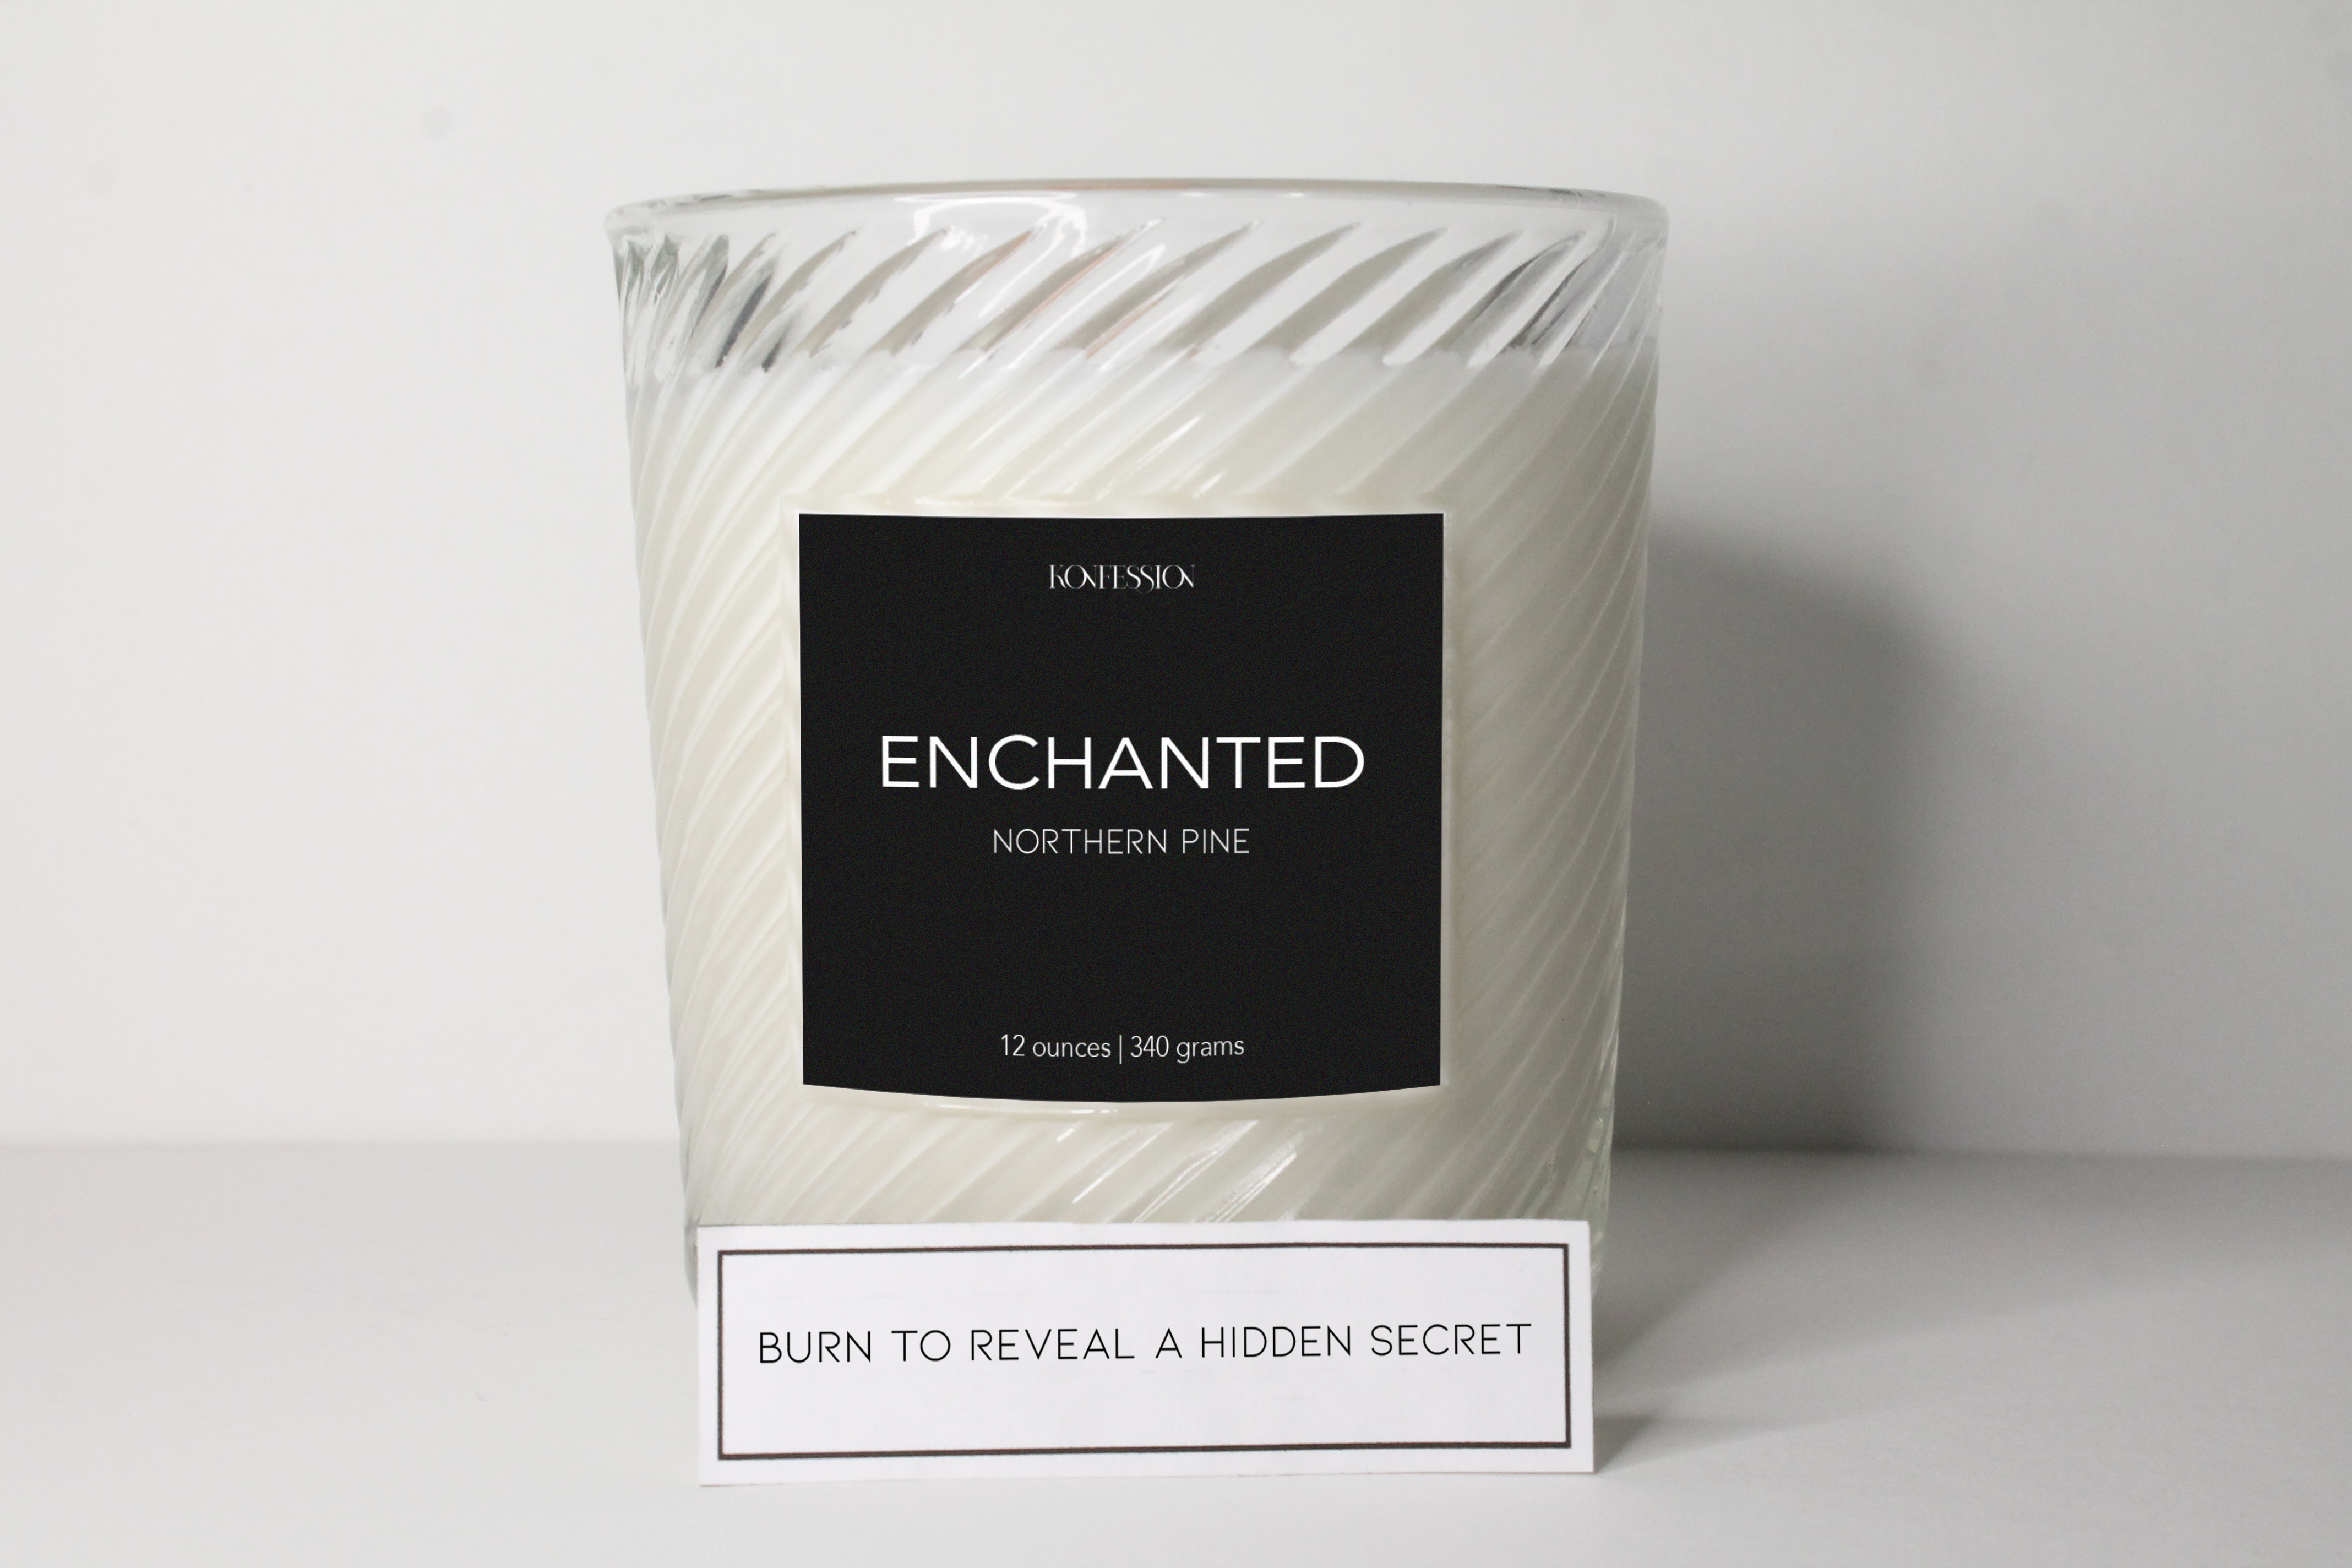 Each soy candle comes with a hidden confession inside sent in by strangers from around the world. Burn to reveal a hidden secret.